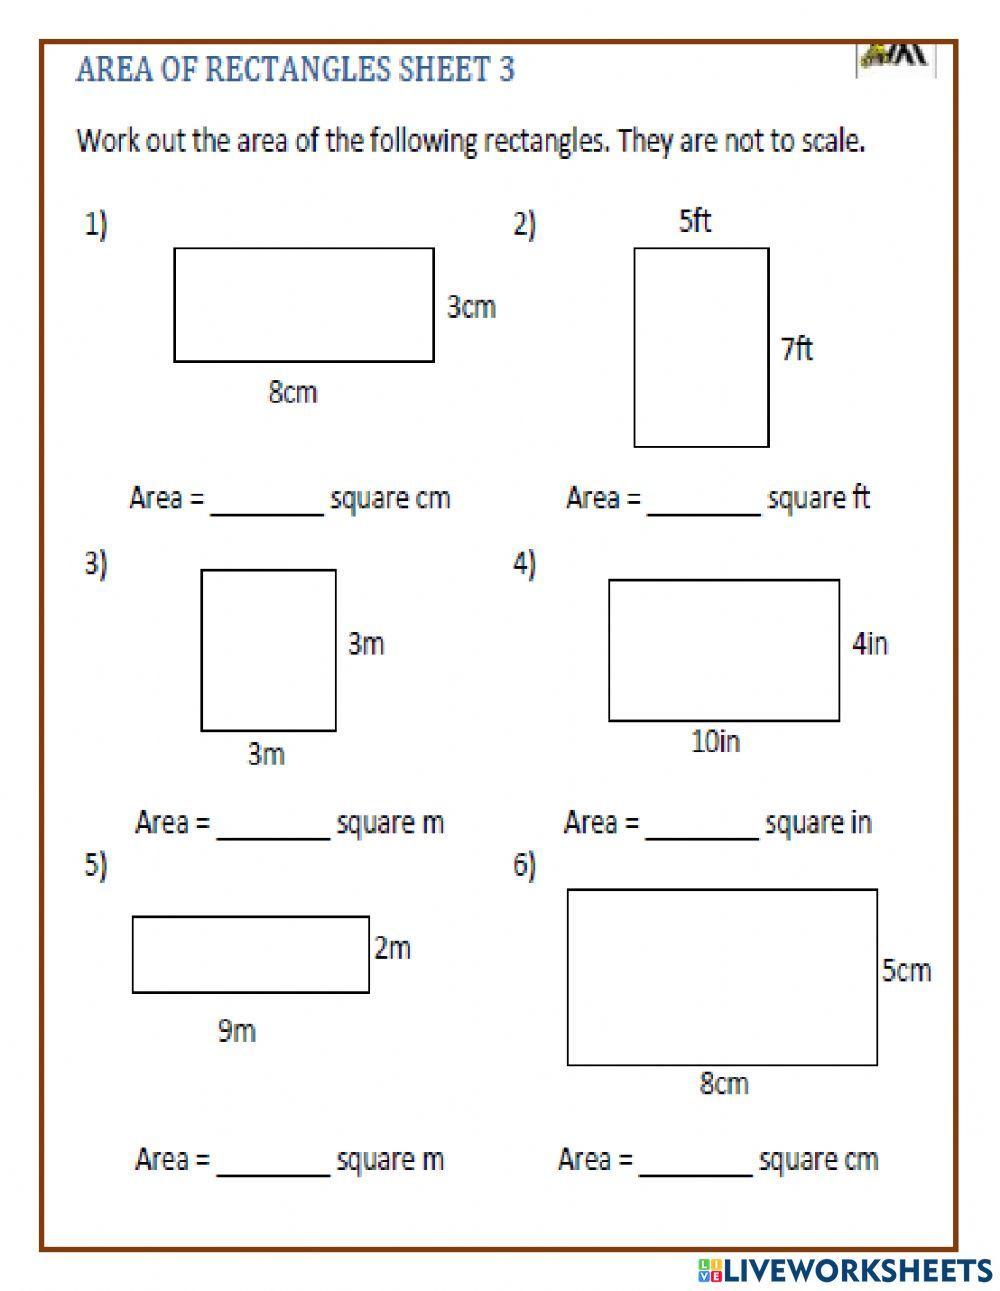 Find the area of a rectangle